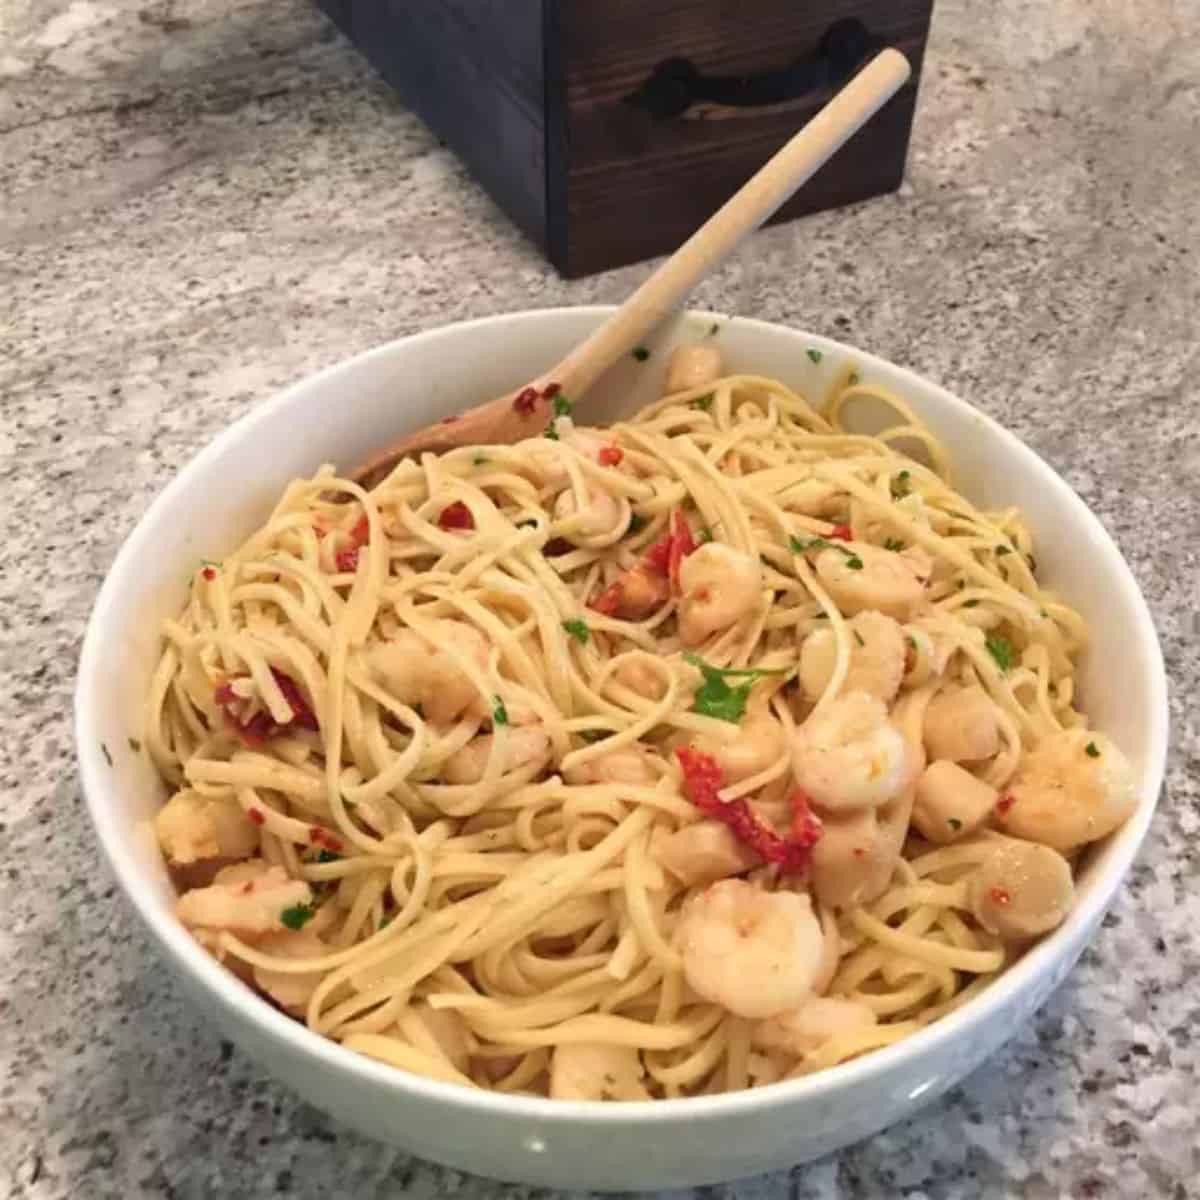 Linguine with Seafood and Sun-dried Tomatoes in a white bowl with a wooden spoon.